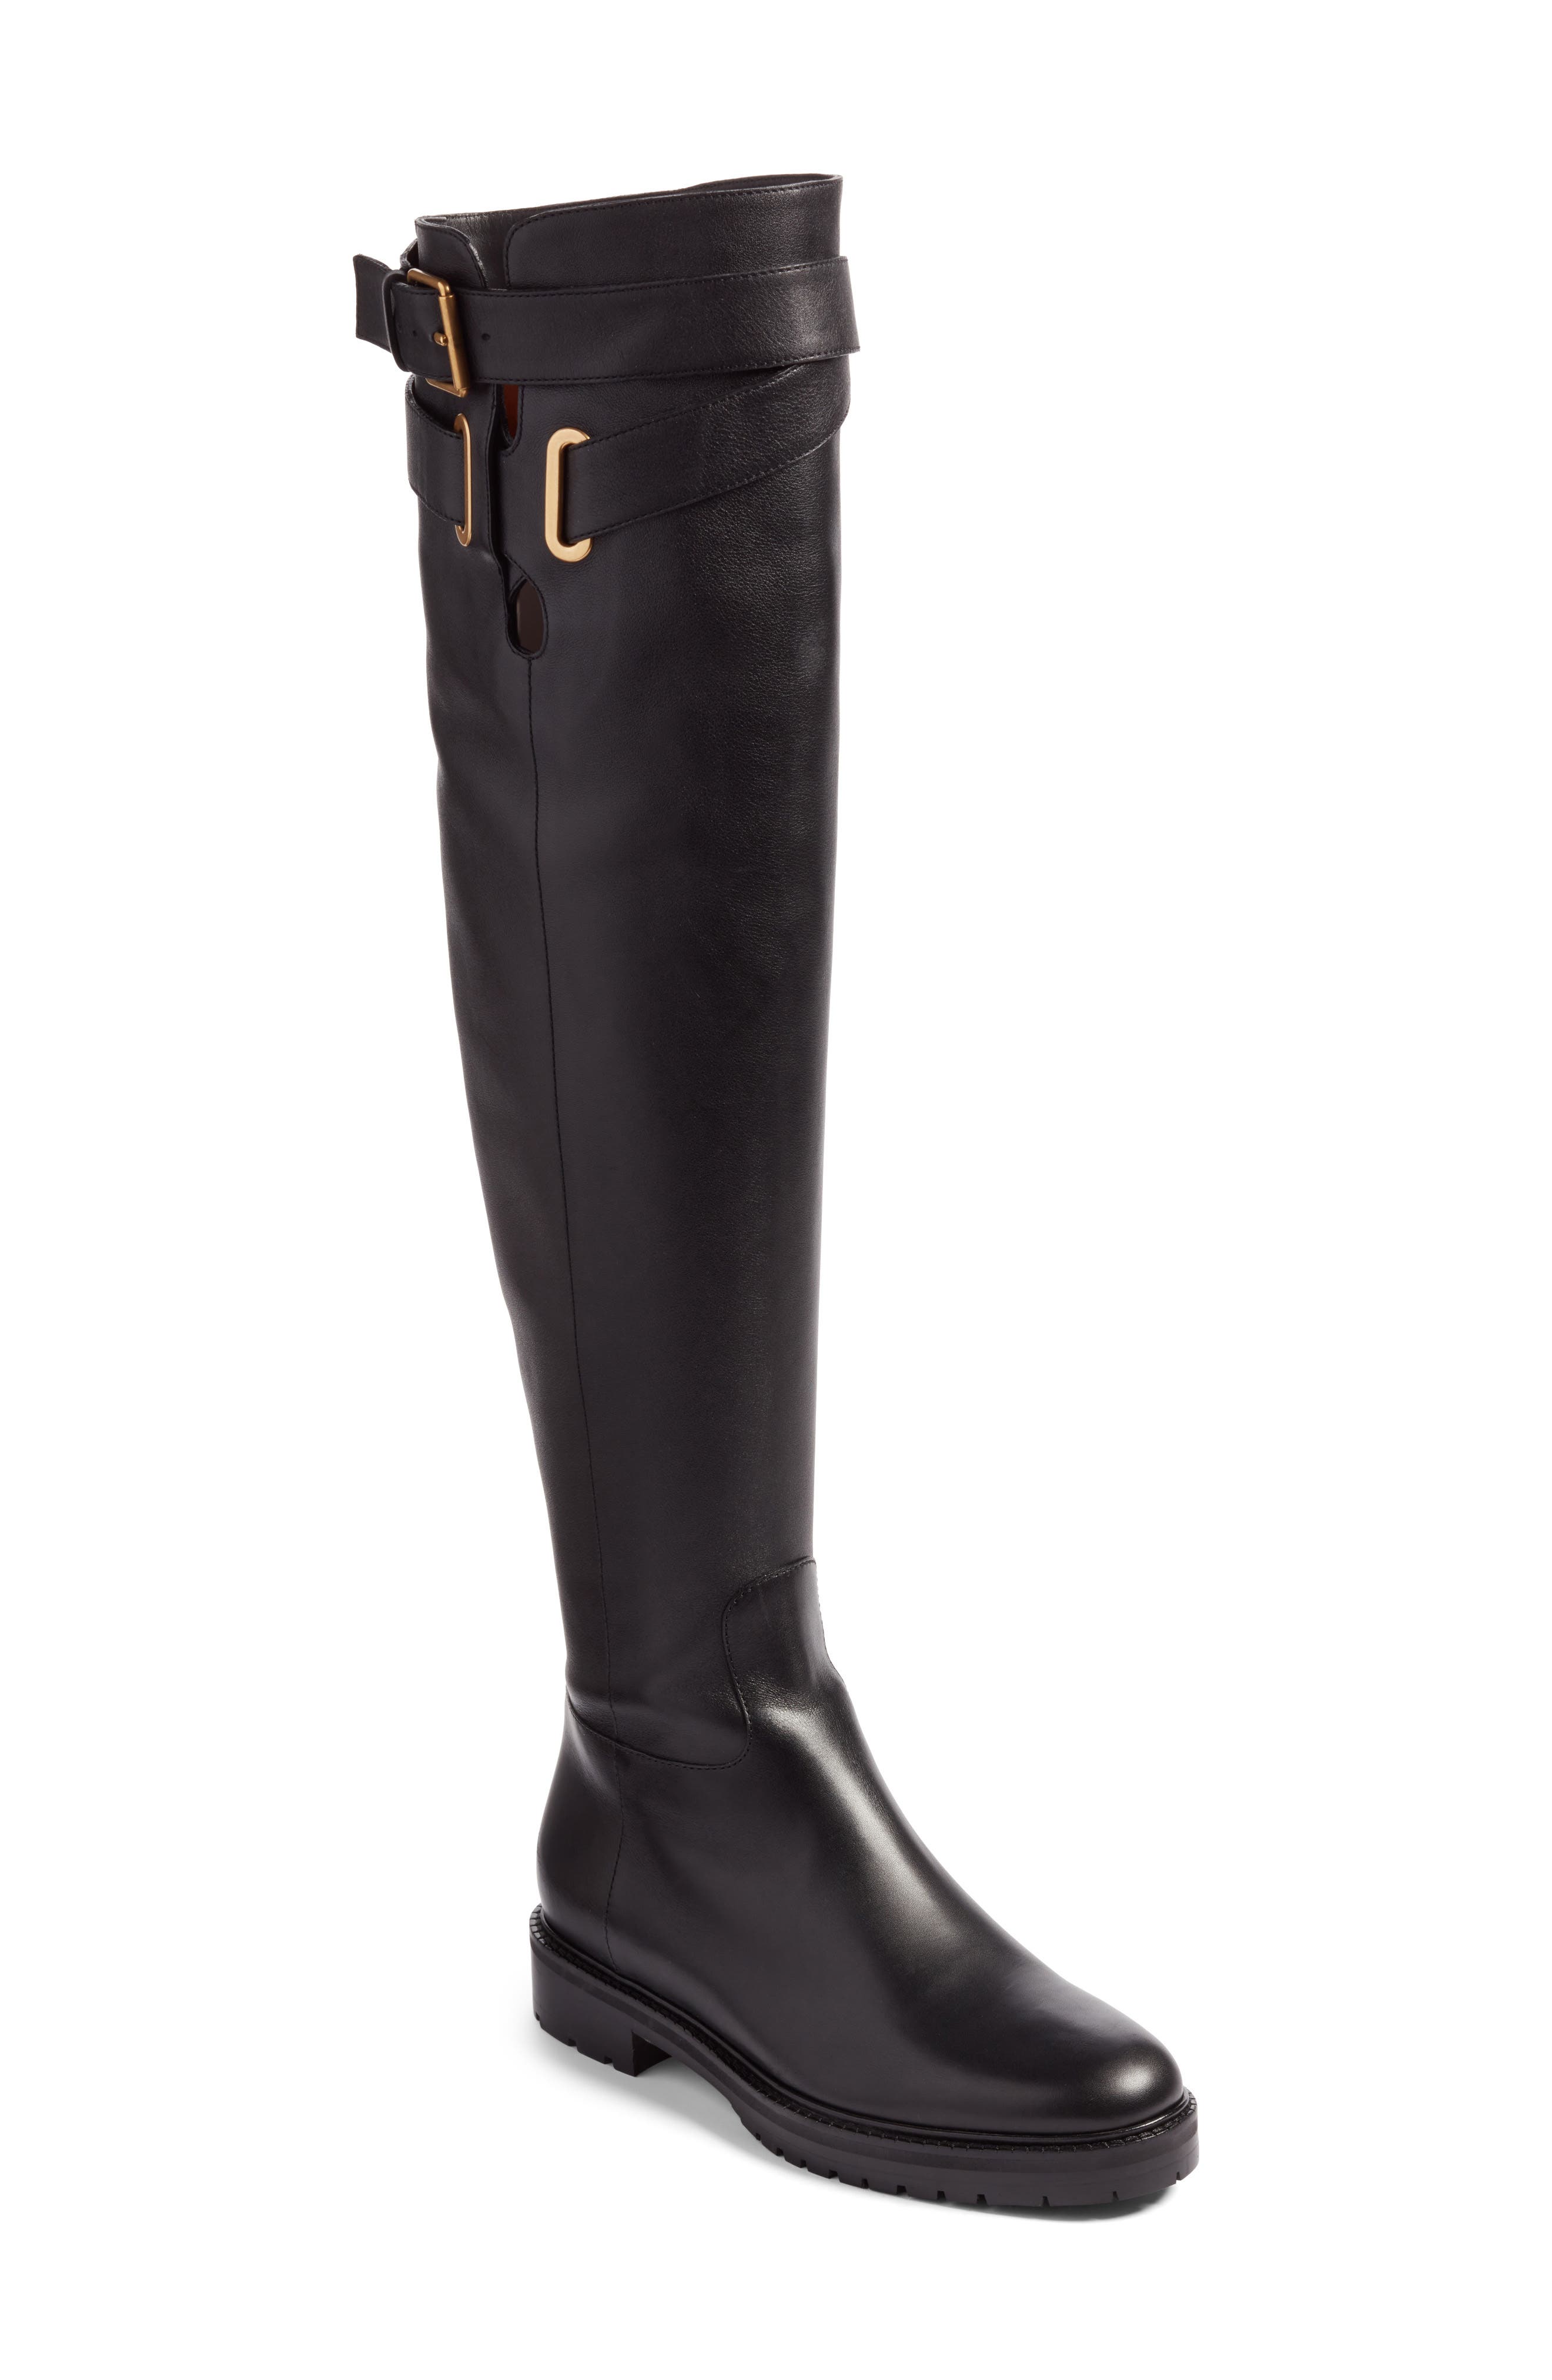 Thigh-High Boots | Nordstrom Rack